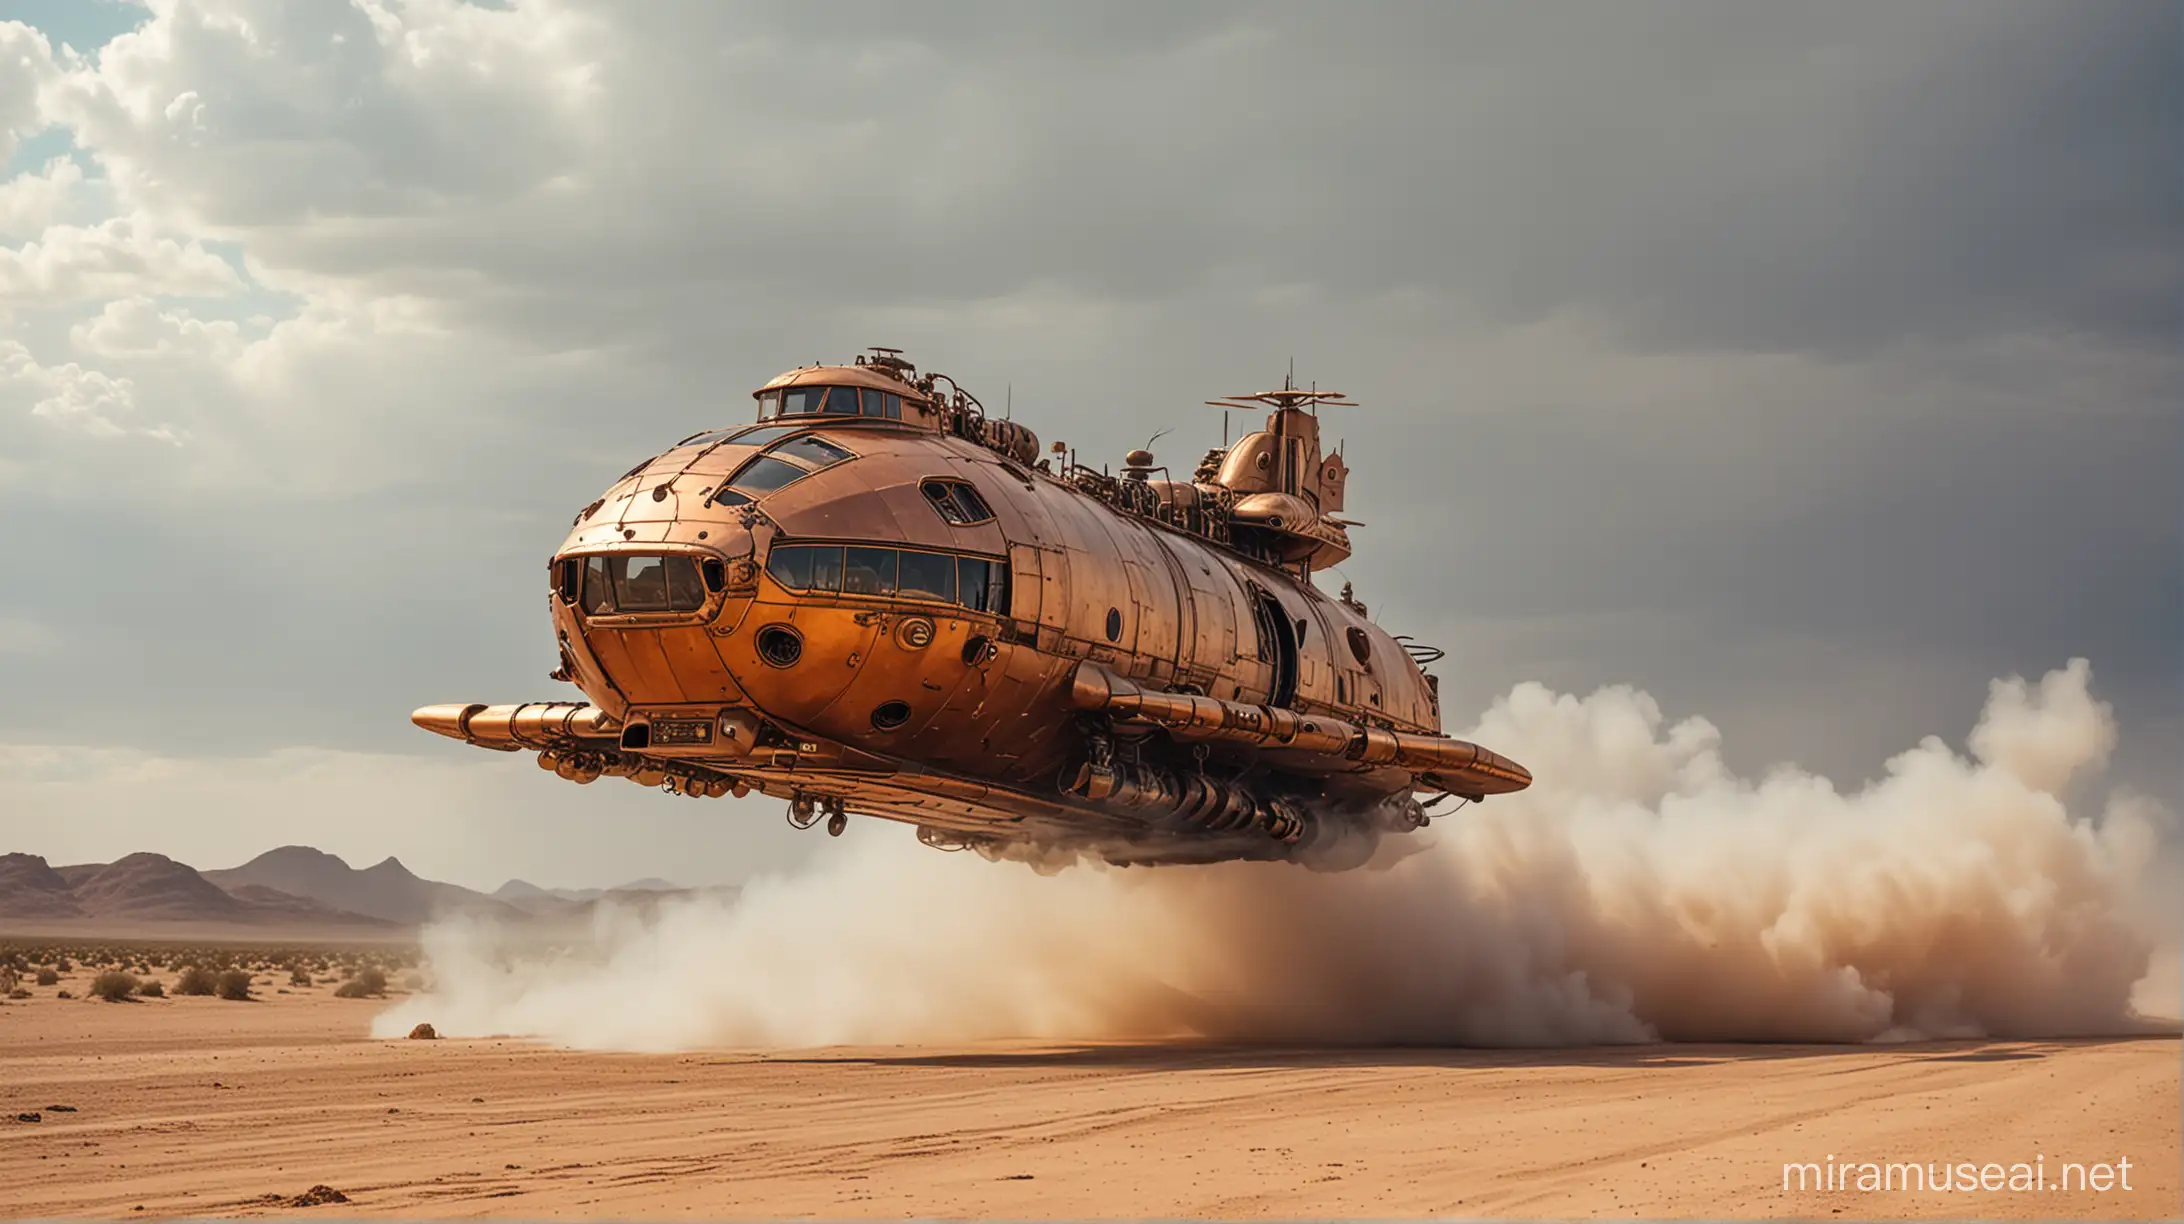 big steampunk hovercraft flies low over the desert, hovercraft made of copper and brass, steam, smoke, much sand in the air, cloudy